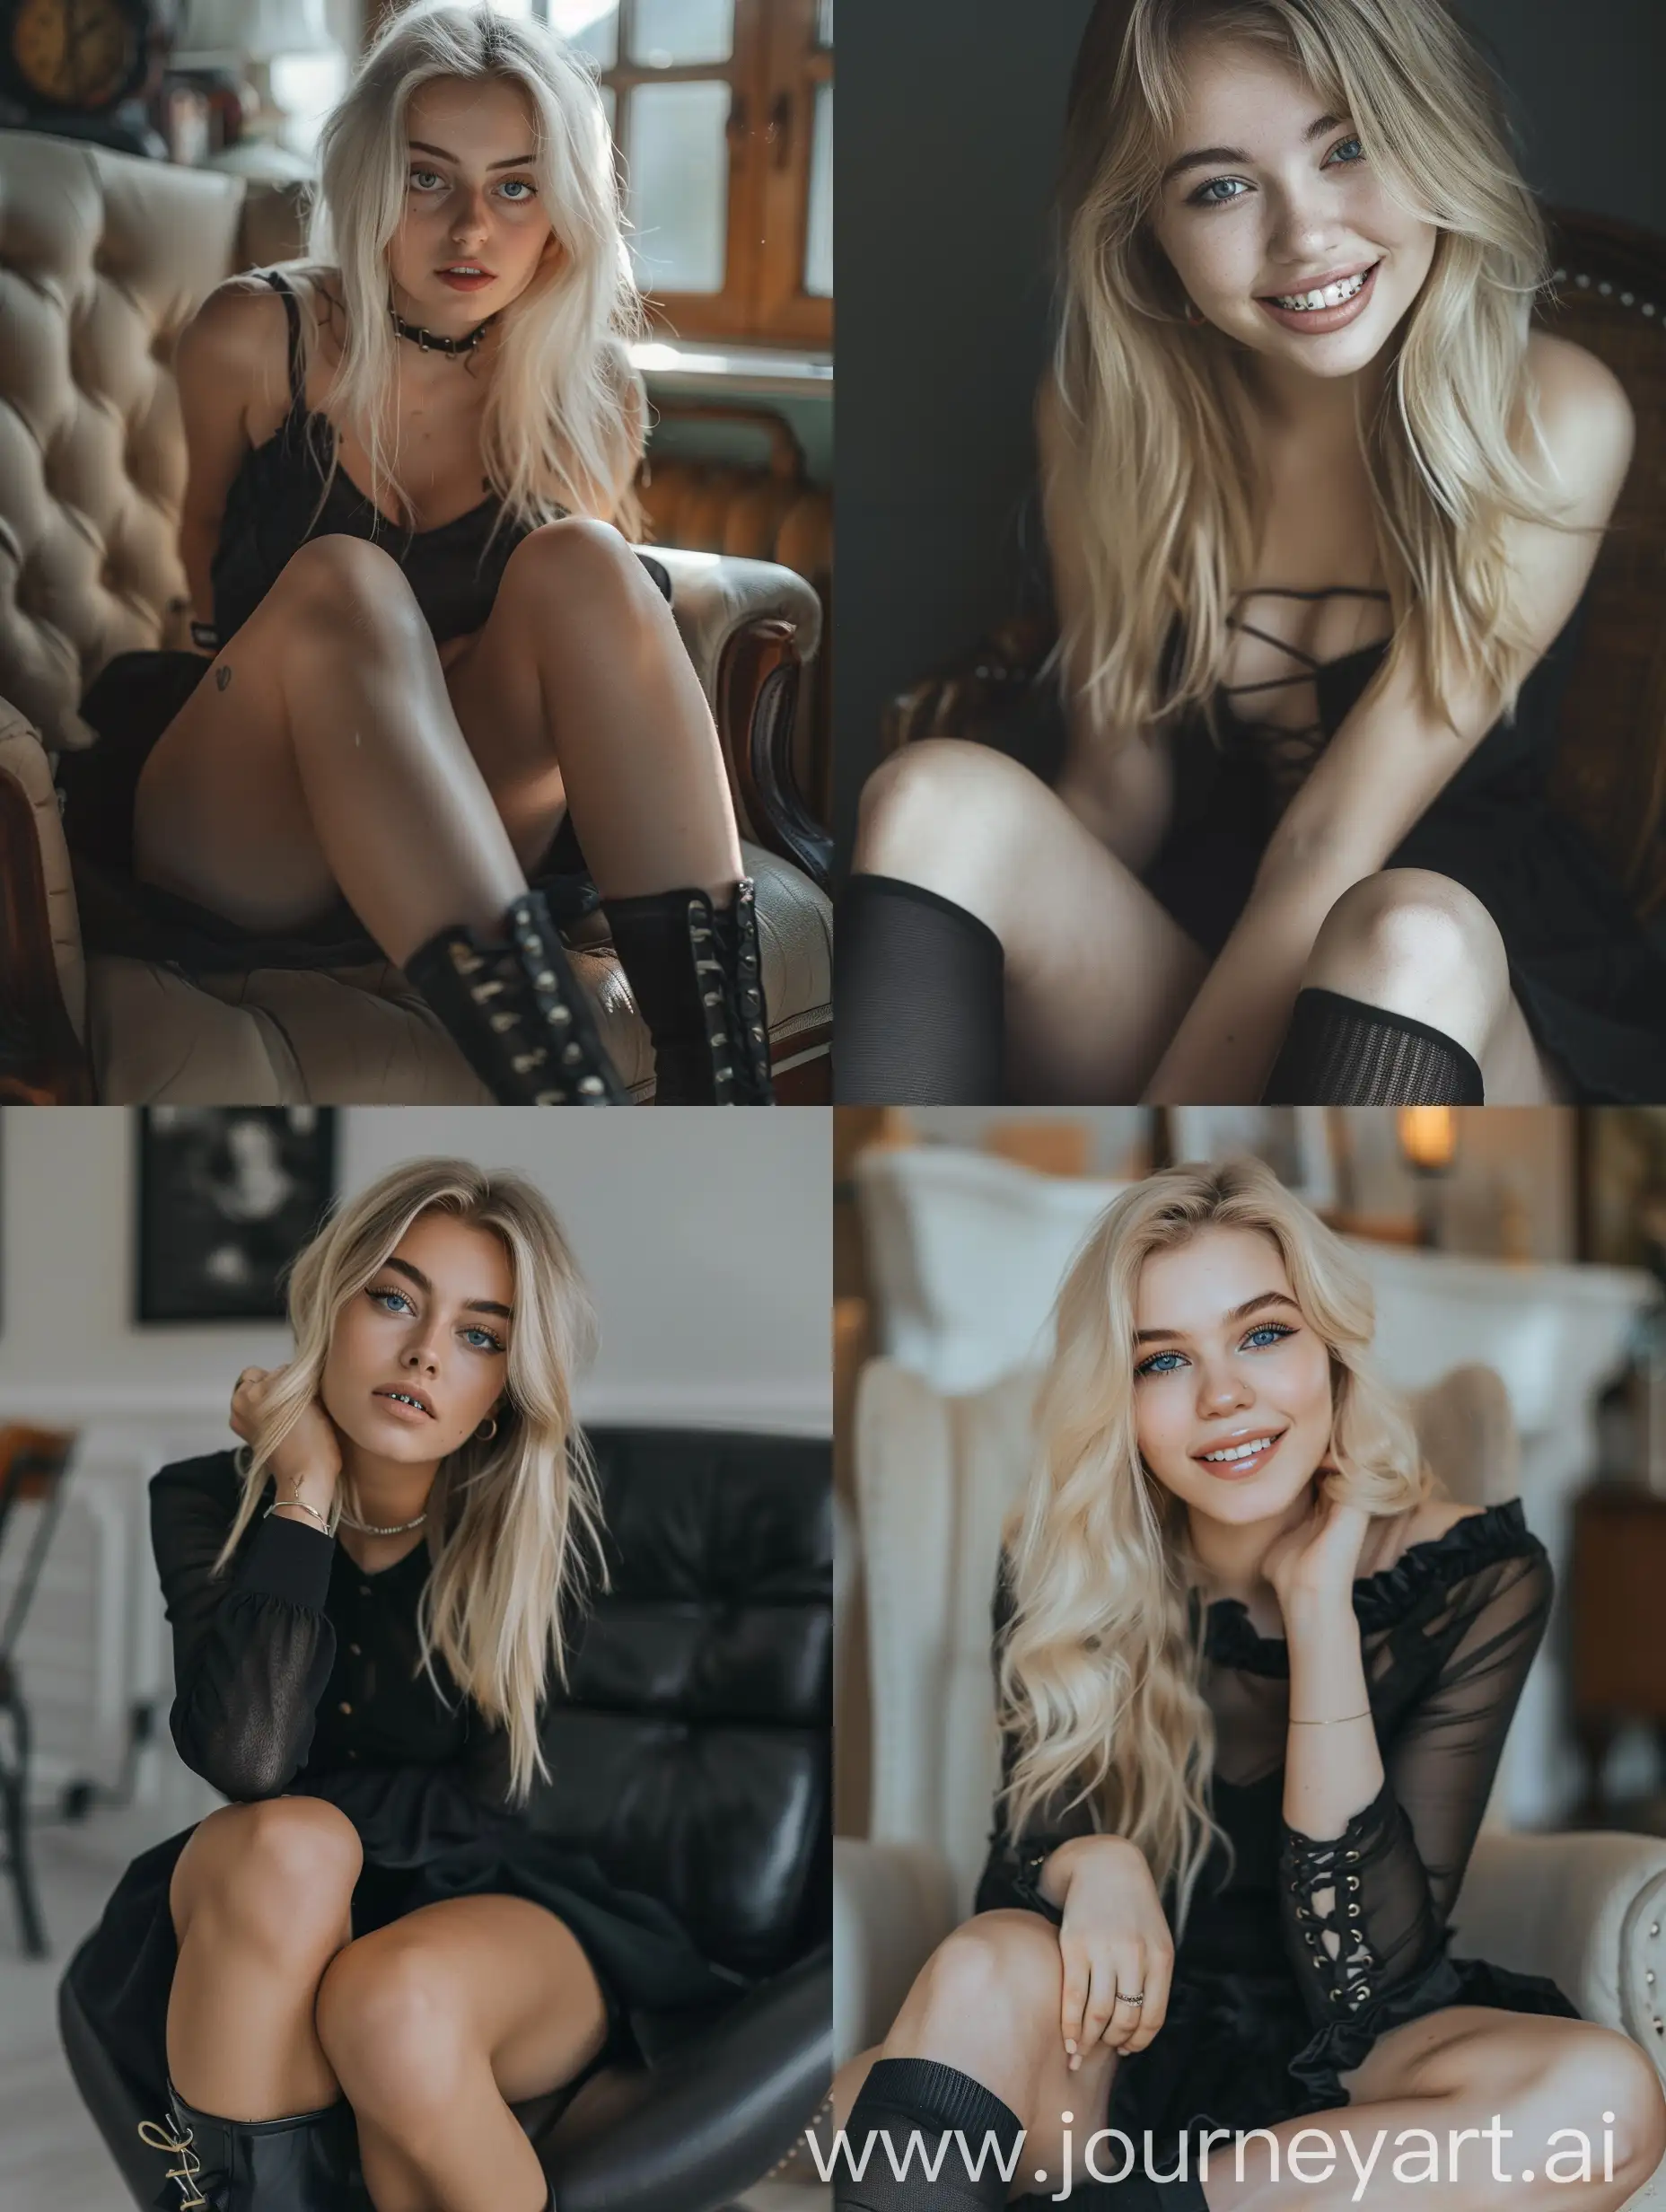 a blonde young woman, 20 years old, influencer, beauty, black dress, makeup,, ,, black boots, ,sitting, ,fat legs, , socks and boots, 4k, sitting onchair, dental braces, blue eye,
, , smiling, close up, front view